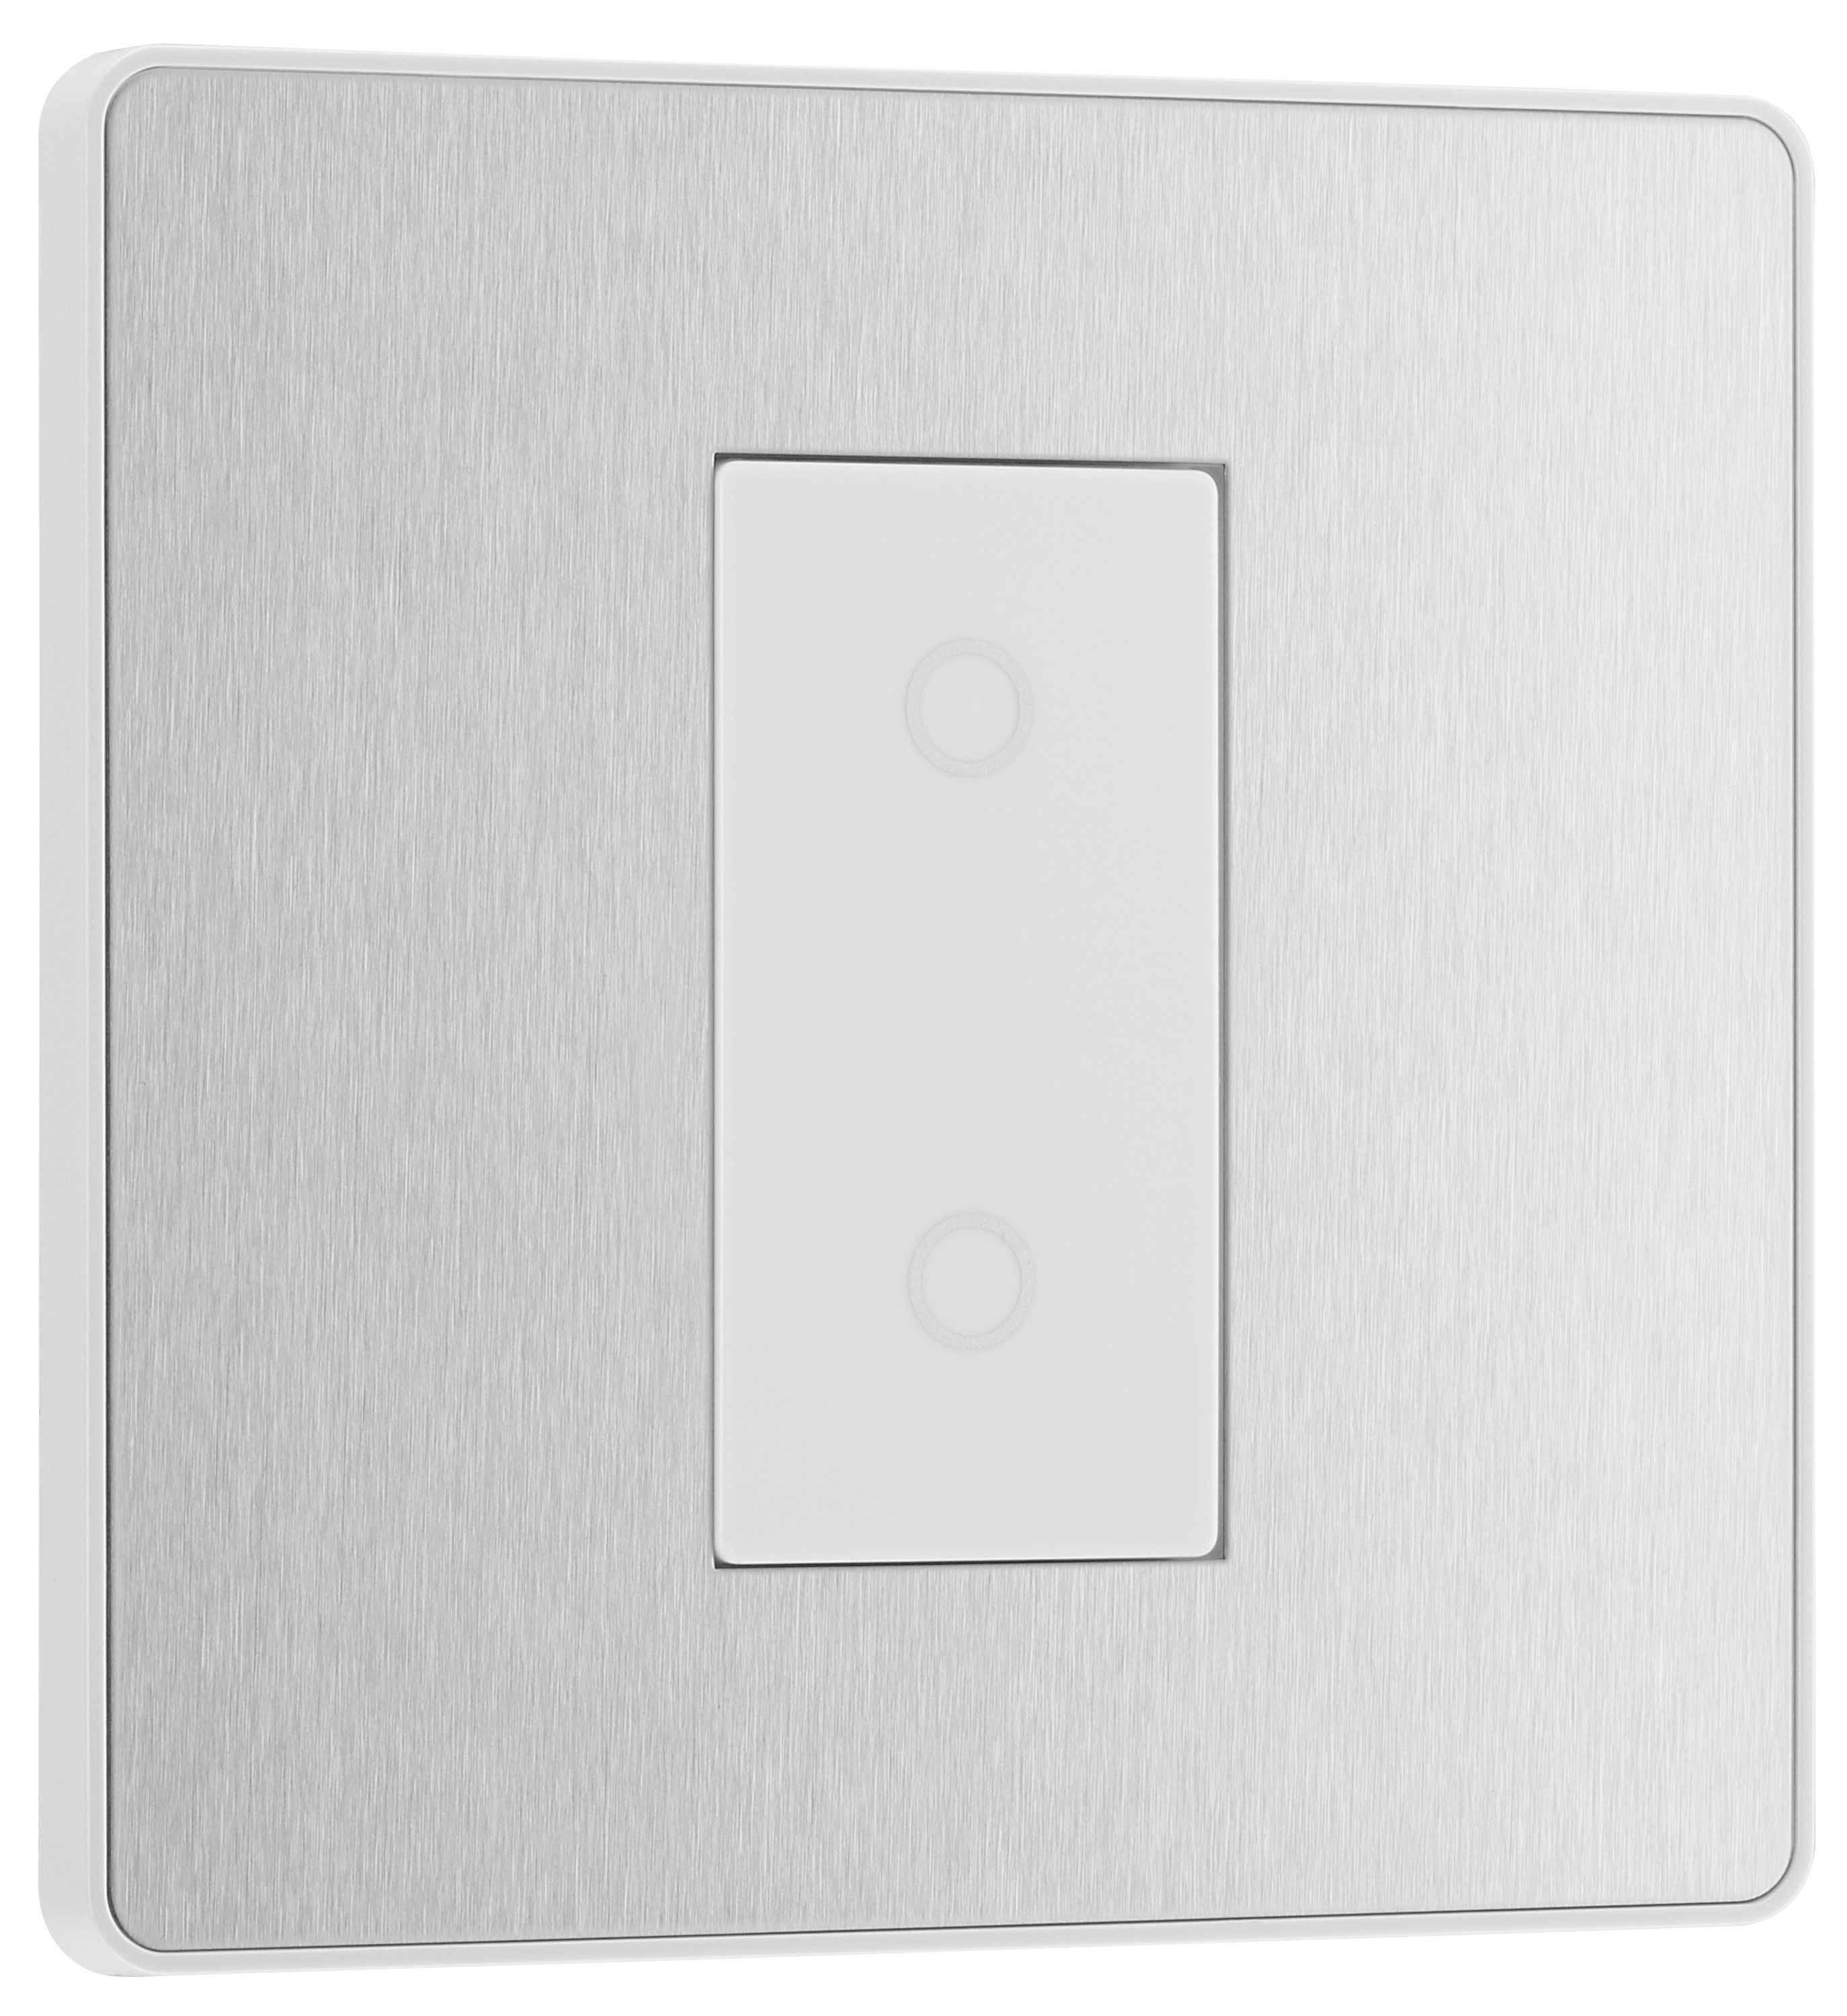 BG Evolve Brushed Steel 2 Way Secondary Single Touch Dimmer Switch - 200W